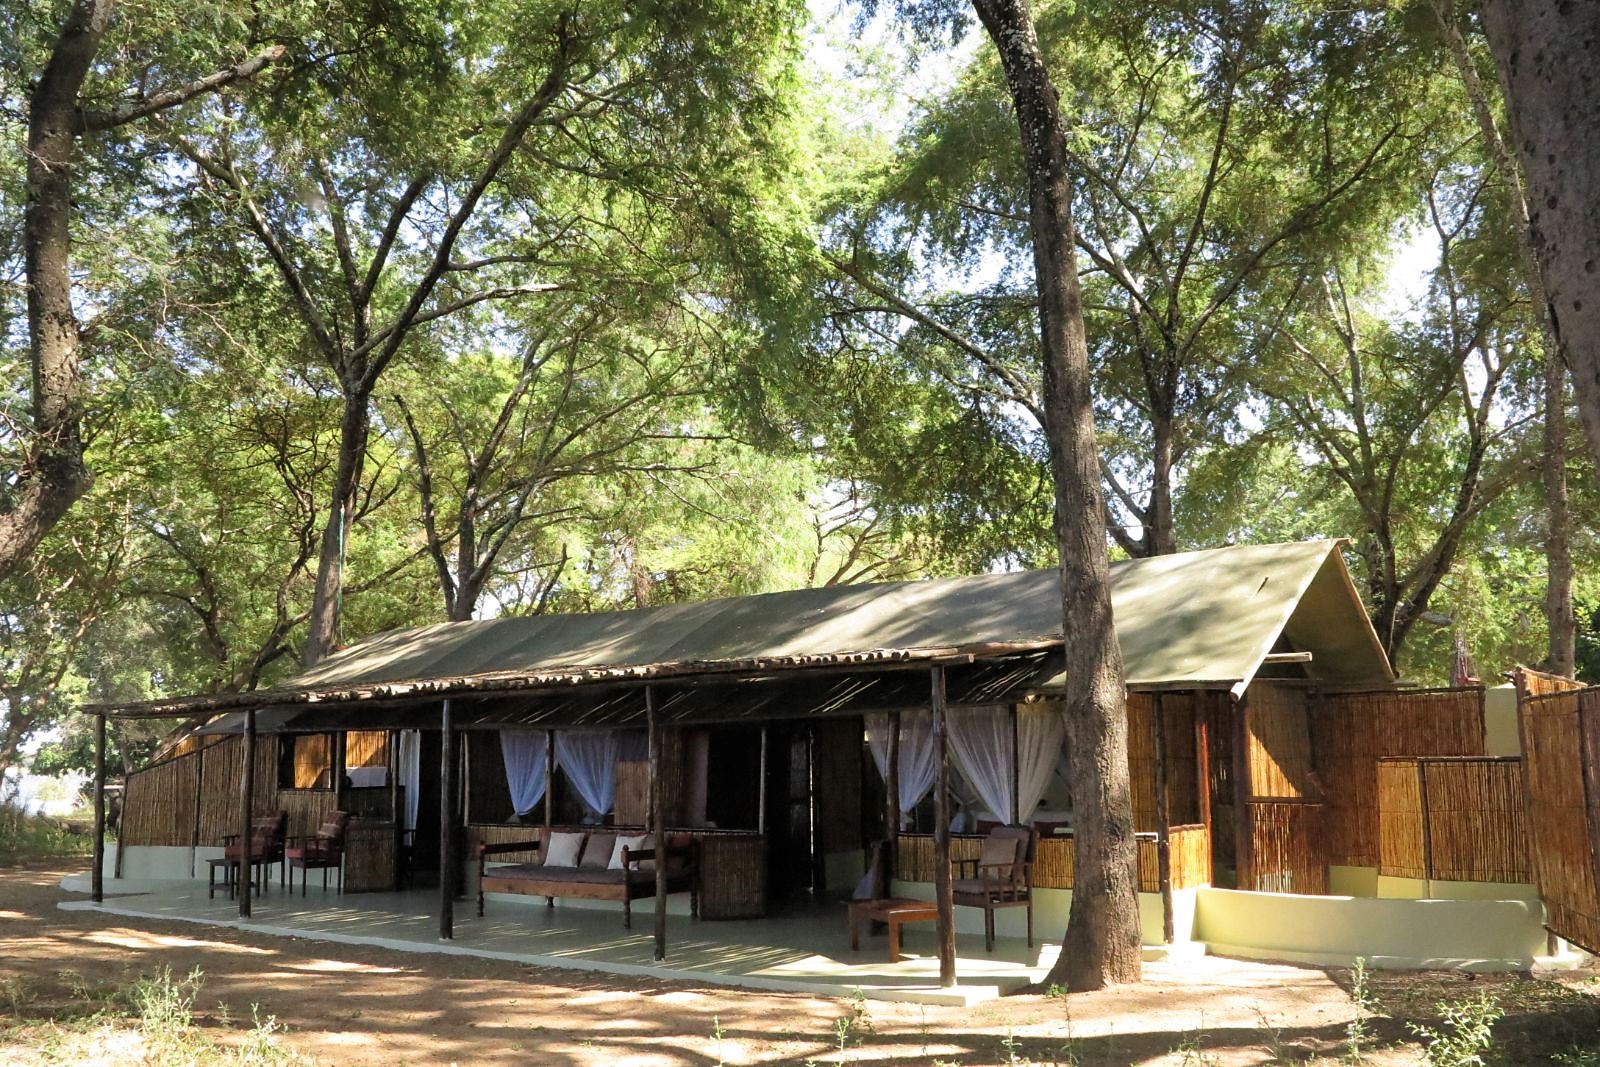 Exterior view of Old Mondoro in the Lower Zambezi National Park